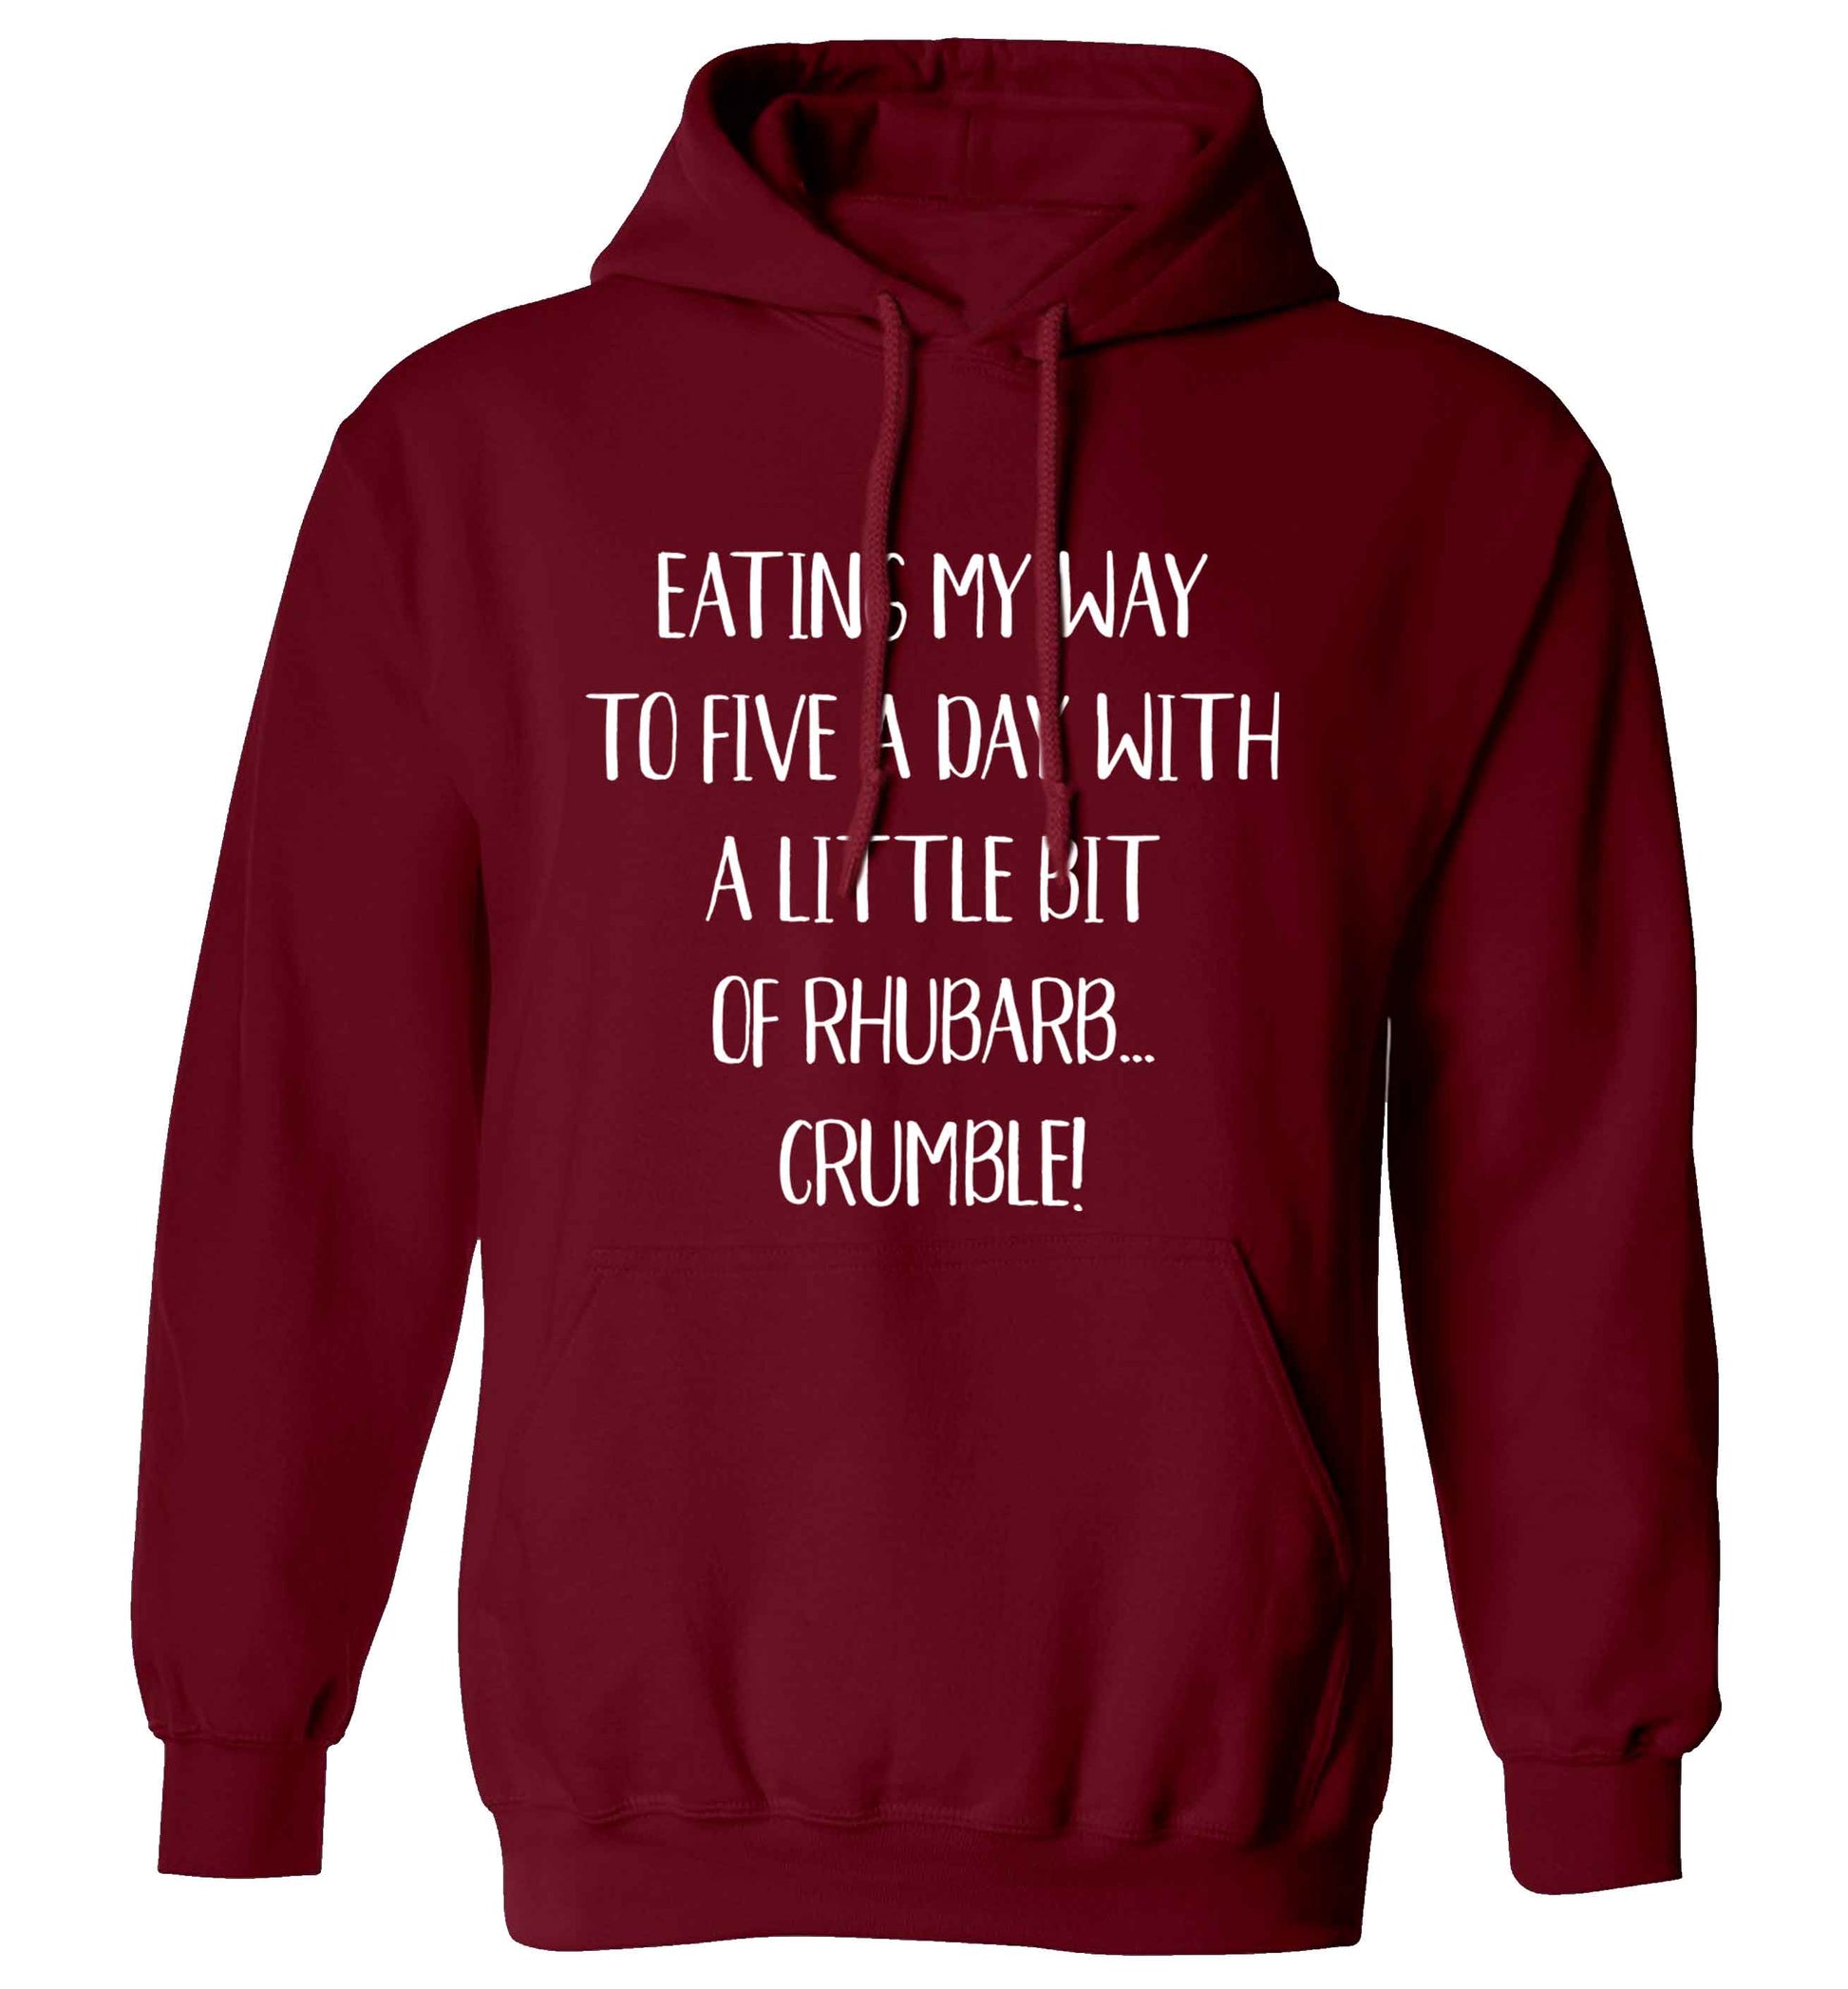 Eating my way to five a day with a little bit of rhubarb crumble adults unisex maroon hoodie 2XL